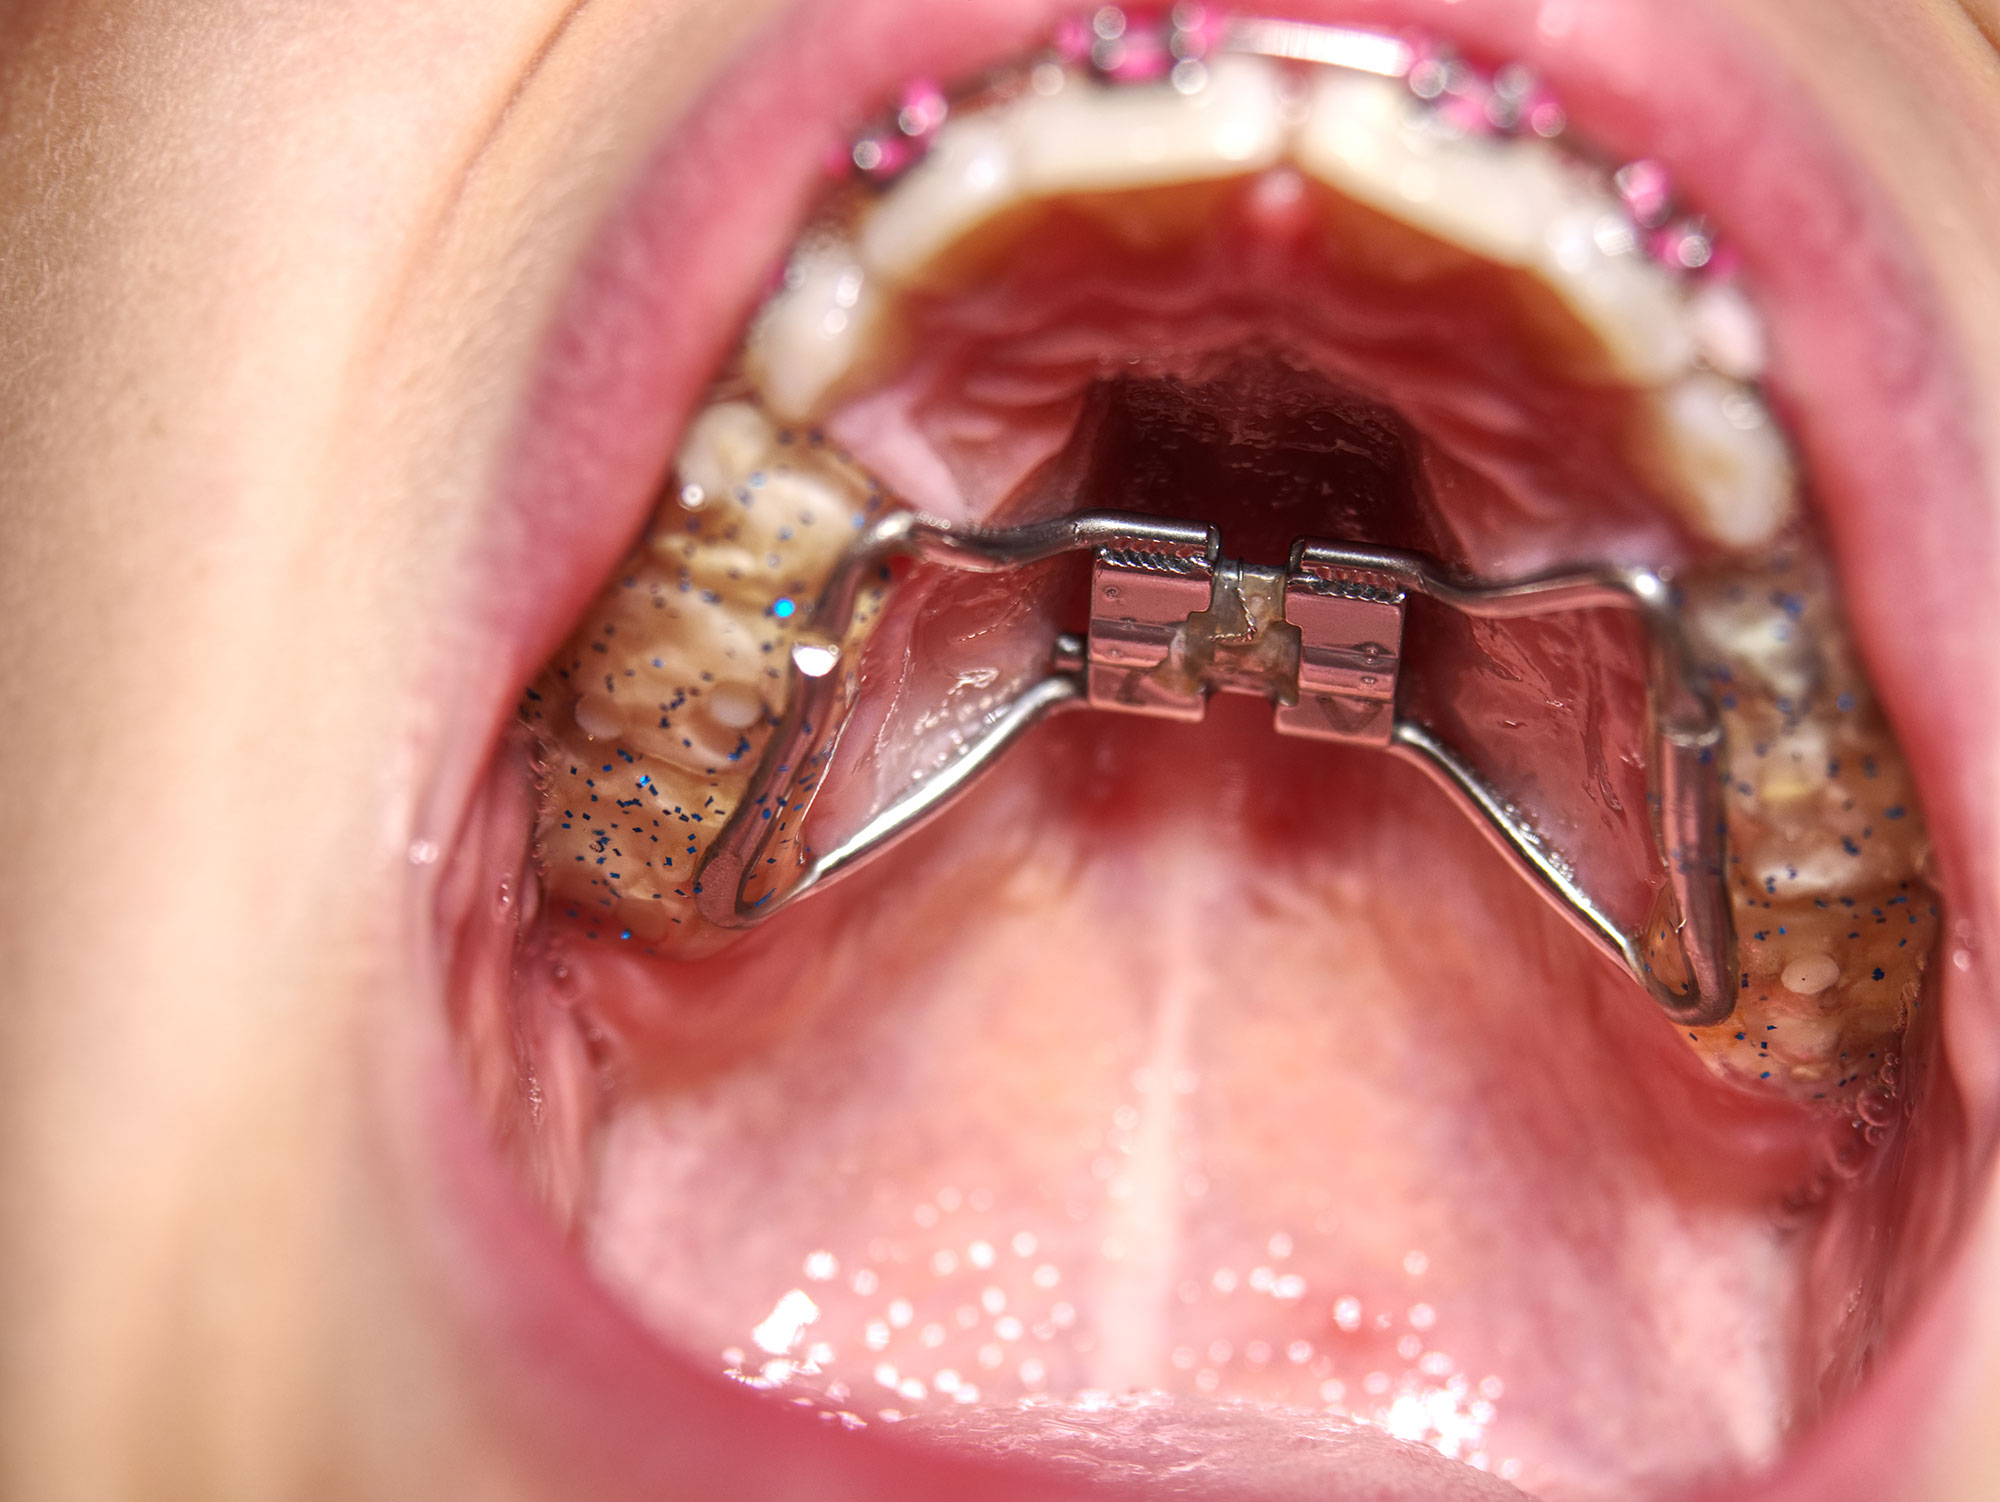 Palatal Expanders FAQ - Everything You Need to Know